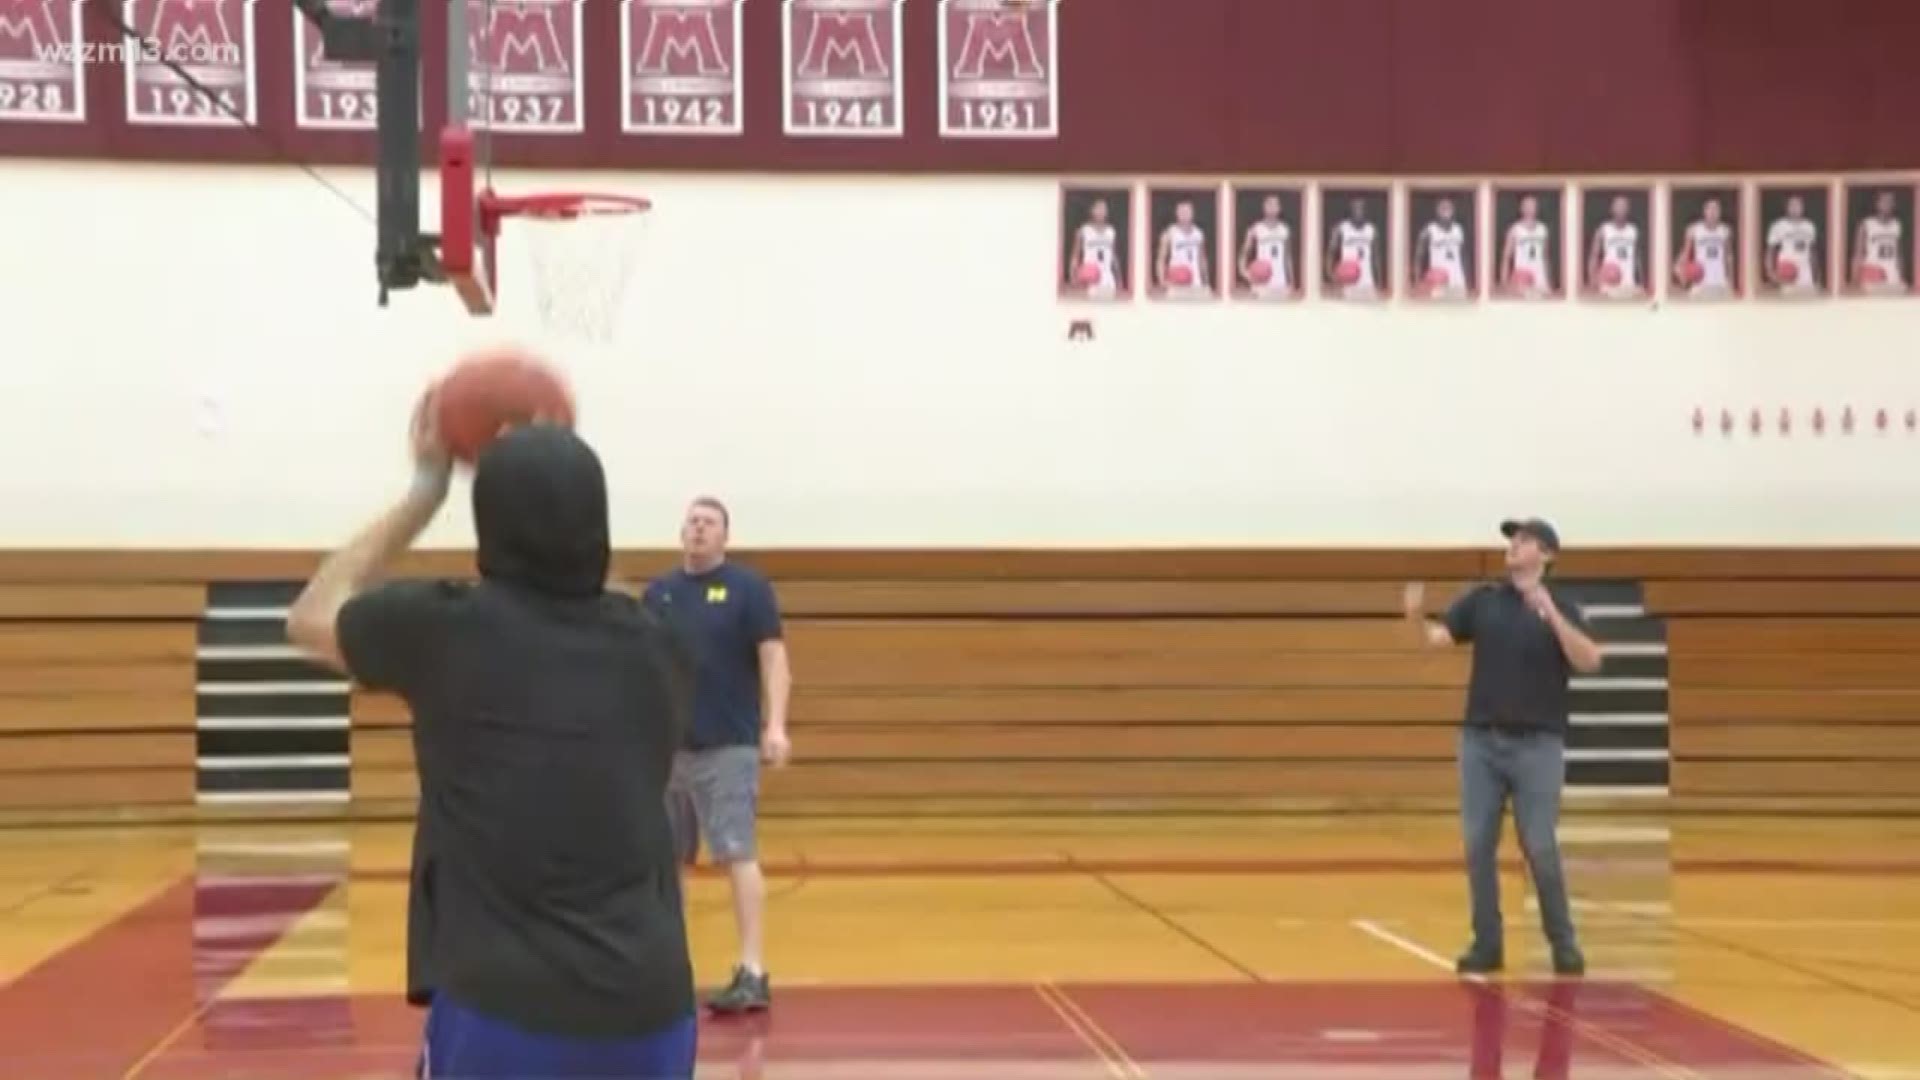 "Heroes For Kids" charity basketball game at Muskegon High School aims to end child abuse.